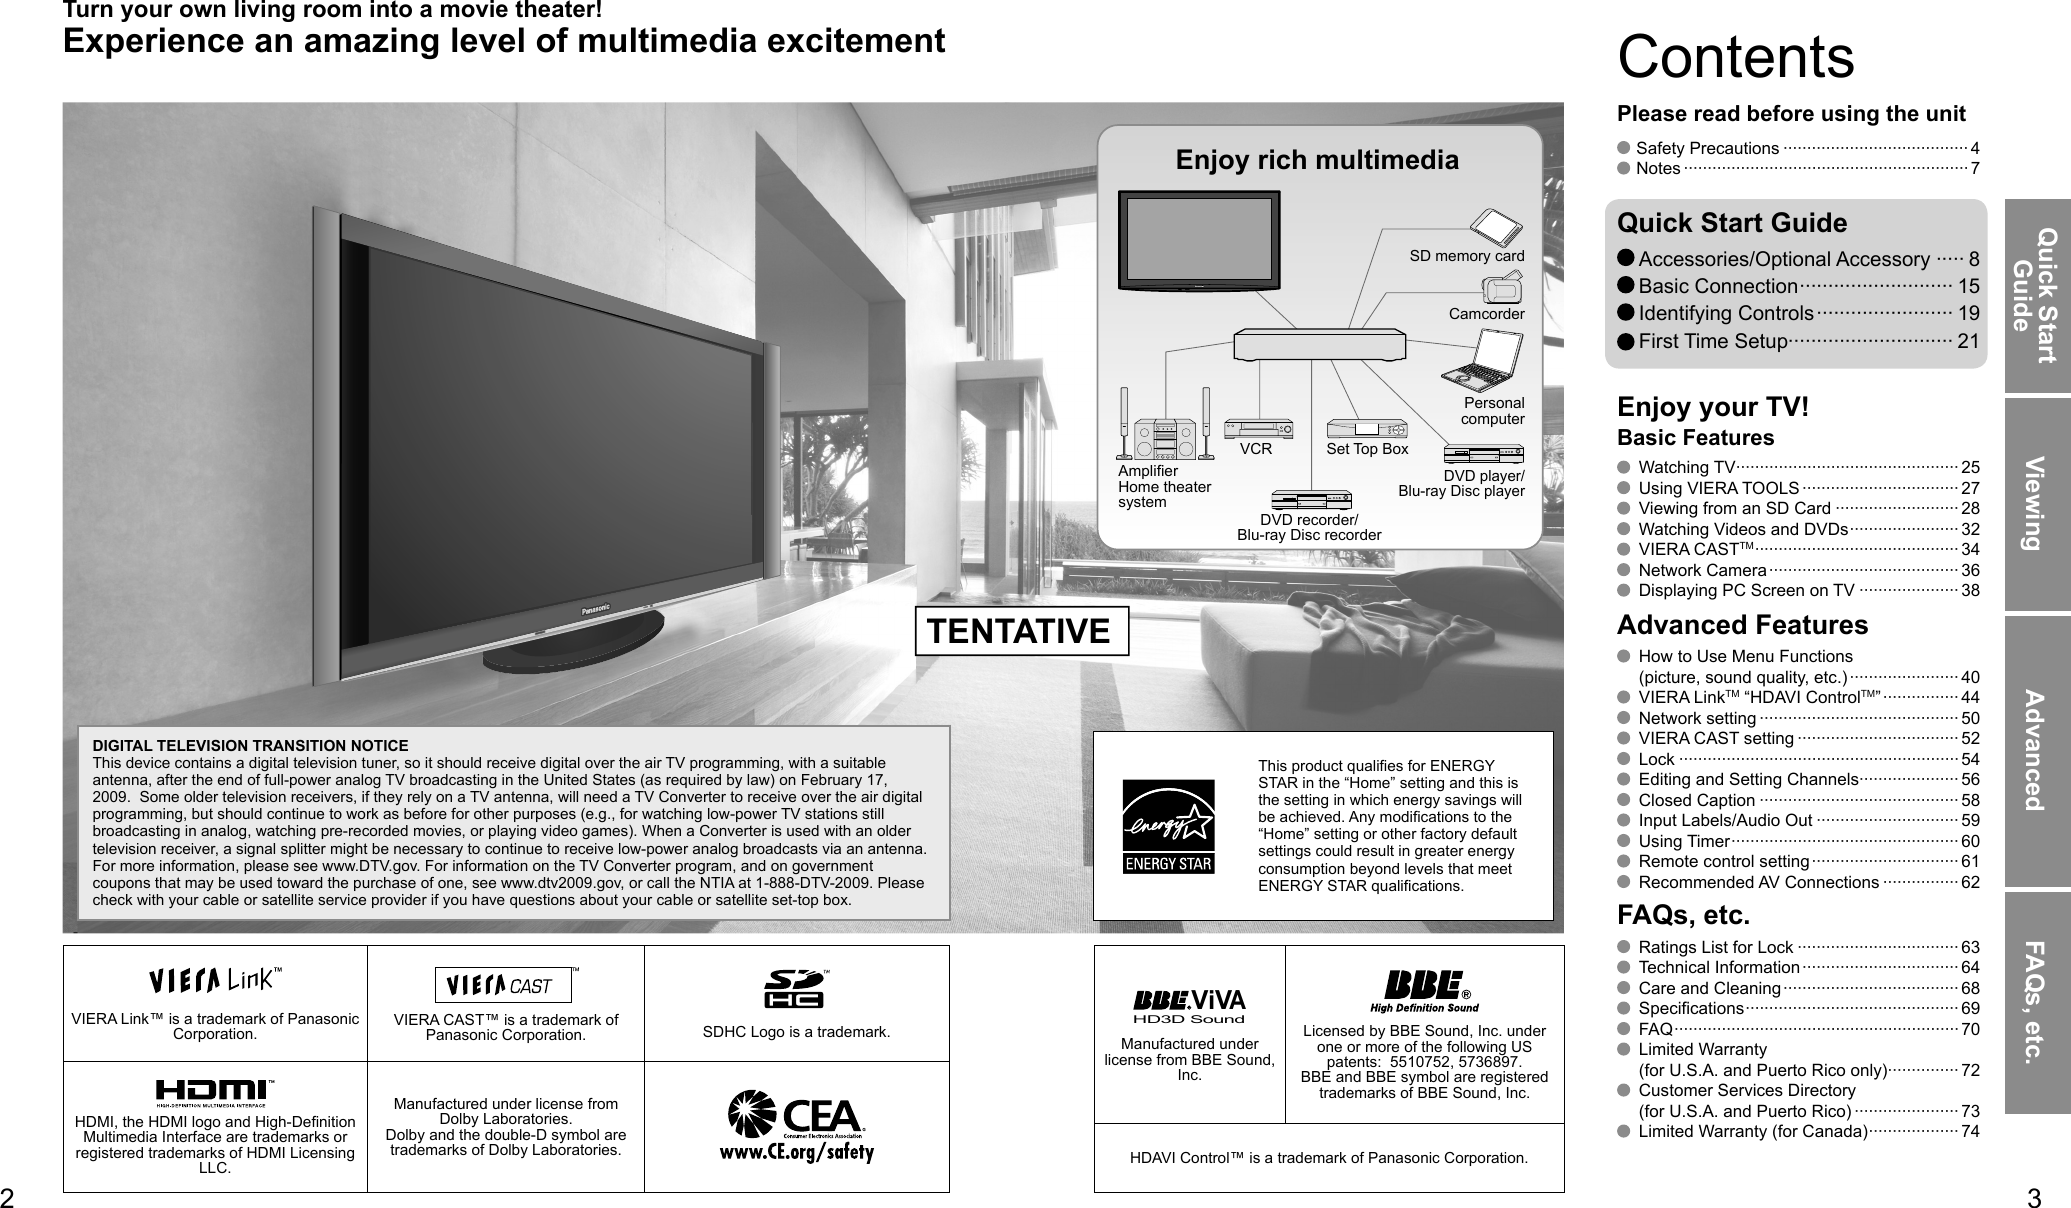 23Viewing Advanced FAQs, etc.Quick Start GuideVIERA Link™ is a trademark of Panasonic Corporation. VIERA CAST™ is a trademark of Panasonic Corporation. SDHC Logo is a trademark.HD3D Sound ViVAManufactured under license from BBE Sound, Inc.Licensed by BBE Sound, Inc. under one or more of the following US patents:  5510752, 5736897. BBE and BBE symbol are registered trademarks of BBE Sound, Inc.HDMI, the HDMI logo and High-Definition Multimedia Interface are trademarks or registered trademarks of HDMI Licensing LLC.Manufactured under license from Dolby Laboratories.Dolby and the double-D symbol are trademarks of Dolby Laboratories. HDAVI Control™ is a trademark of Panasonic Corporation. Watching TV ··············································· 25 Using VIERA TOOLS ································· 27  Viewing from an SD Card ·························· 28  Watching Videos and DVDs ······················· 32 VIERA CASTTM ··········································· 34 Network Camera ········································ 36  Displaying PC Screen on TV ····················· 38  How to Use Menu Functions (picture, sound quality, etc.) ······················· 40 VIERA LinkTM “HDAVI ControlTM” ················ 44 Network setting ·········································· 50  VIERA CAST setting ·································· 52 Lock ··························································· 54  Editing and Setting Channels····················· 56 Closed Caption ·········································· 58  Input Labels/Audio Out ······························ 59 Using Timer ················································ 60  Remote control setting ······························· 61 Recommended AV Connections ················62  Ratings List for Lock ·································· 63 Technical Information ·································64  Care and Cleaning ····································· 68 Specifications ············································· 69 FAQ ···························································· 70 Limited Warranty (for U.S.A. and Puerto Rico only)··············· 72  Customer Services Directory (for U.S.A. and Puerto Rico) ······················73  Limited Warranty (for Canada) ··················· 74Enjoy your TV!Basic FeaturesAdvanced FeaturesFAQs, etc. Safety Precautions ······································· 4 Notes ···························································· 7Please read before using the unitTurn your own living room into a movie theater!Experience an amazing level of multimedia excitement Accessories/Optional Accessory ····· 8 Basic Connection ··························· 15 Identifying Controls ························ 19 First Time Setup····························· 21Quick Start GuideEnjoy rich multimediaSD memory cardCamcorderAmplifierHome theater systemVCRDVD recorder/Blu-ray Disc recorderSet Top BoxDVD player/Blu-ray Disc playerContentsDIGITAL TELEVISION TRANSITION NOTICEThis device contains a digital television tuner, so it should receive digital over the air TV programming, with a suitable antenna, after the end of full-power analog TV broadcasting in the United States (as required by law) on February 17, 2009.  Some older television receivers, if they rely on a TV antenna, will need a TV Converter to receive over the air digital programming, but should continue to work as before for other purposes (e.g., for watching low-power TV stations still broadcasting in analog, watching pre-recorded movies, or playing video games). When a Converter is used with an older television receiver, a signal splitter might be necessary to continue to receive low-power analog broadcasts via an antenna. For more information, please see www.DTV.gov. For information on the TV Converter program, and on government coupons that may be used toward the purchase of one, see www.dtv2009.gov, or call the NTIA at 1-888-DTV-2009. Please check with your cable or satellite service provider if you have questions about your cable or satellite set-top box.Personal computerThis product qualifies for ENERGY STAR in the “Home” setting and this is the setting in which energy savings will be achieved. Any modifications to the “Home” setting or other factory default settings could result in greater energy consumption beyond levels that meet ENERGY STAR qualifications.TENTATIVE